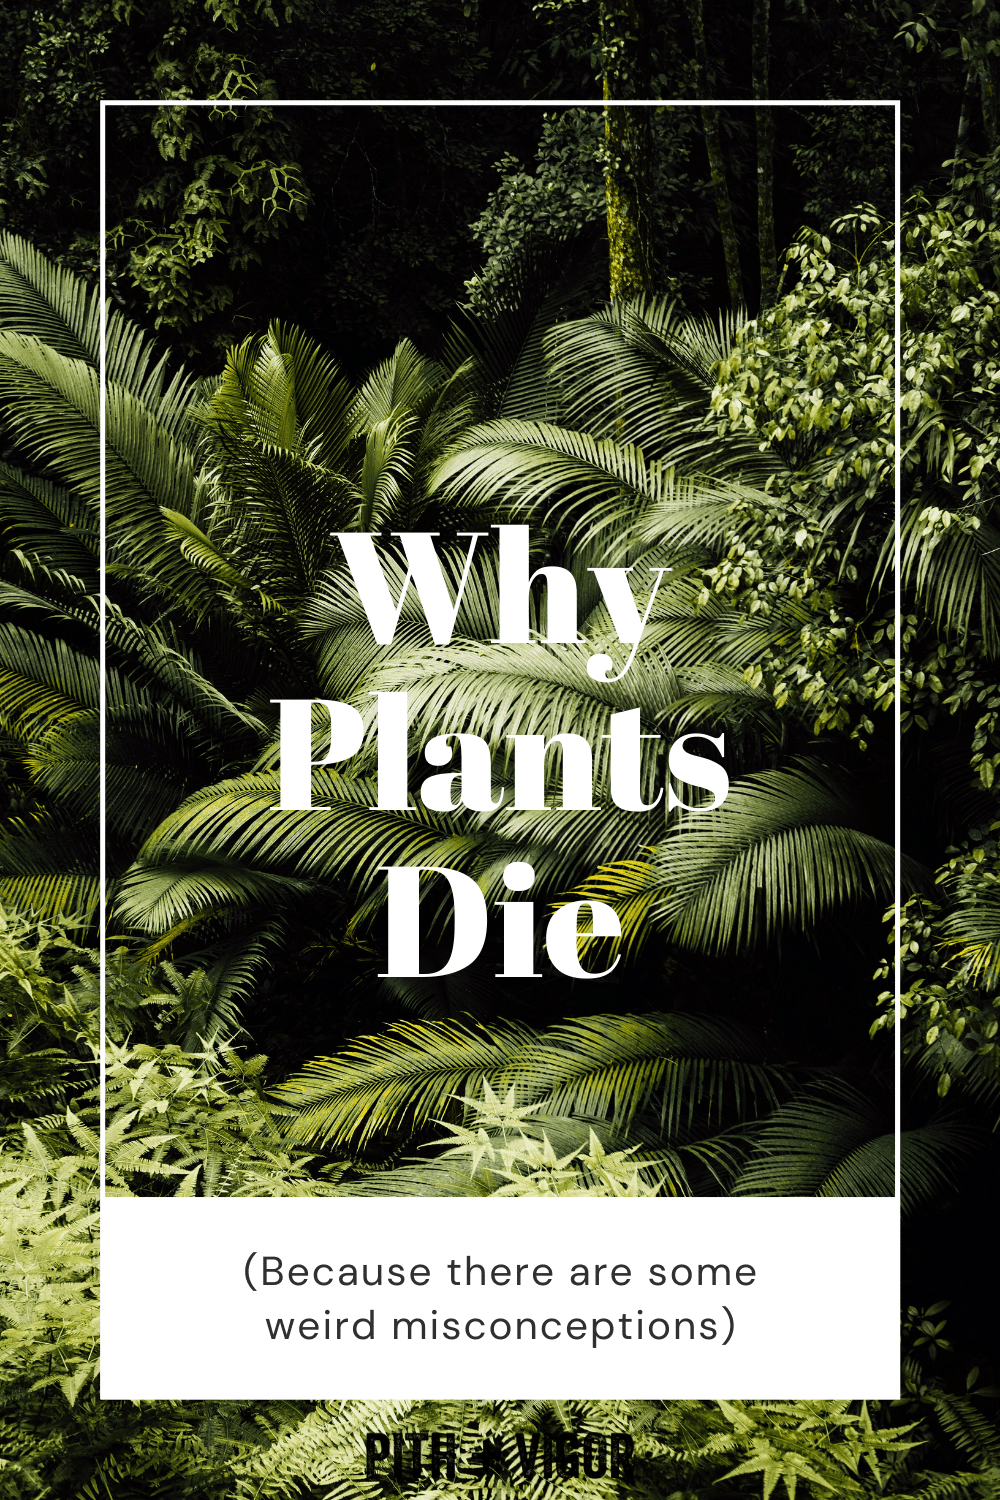 Why plants die - because there are some misconceptions